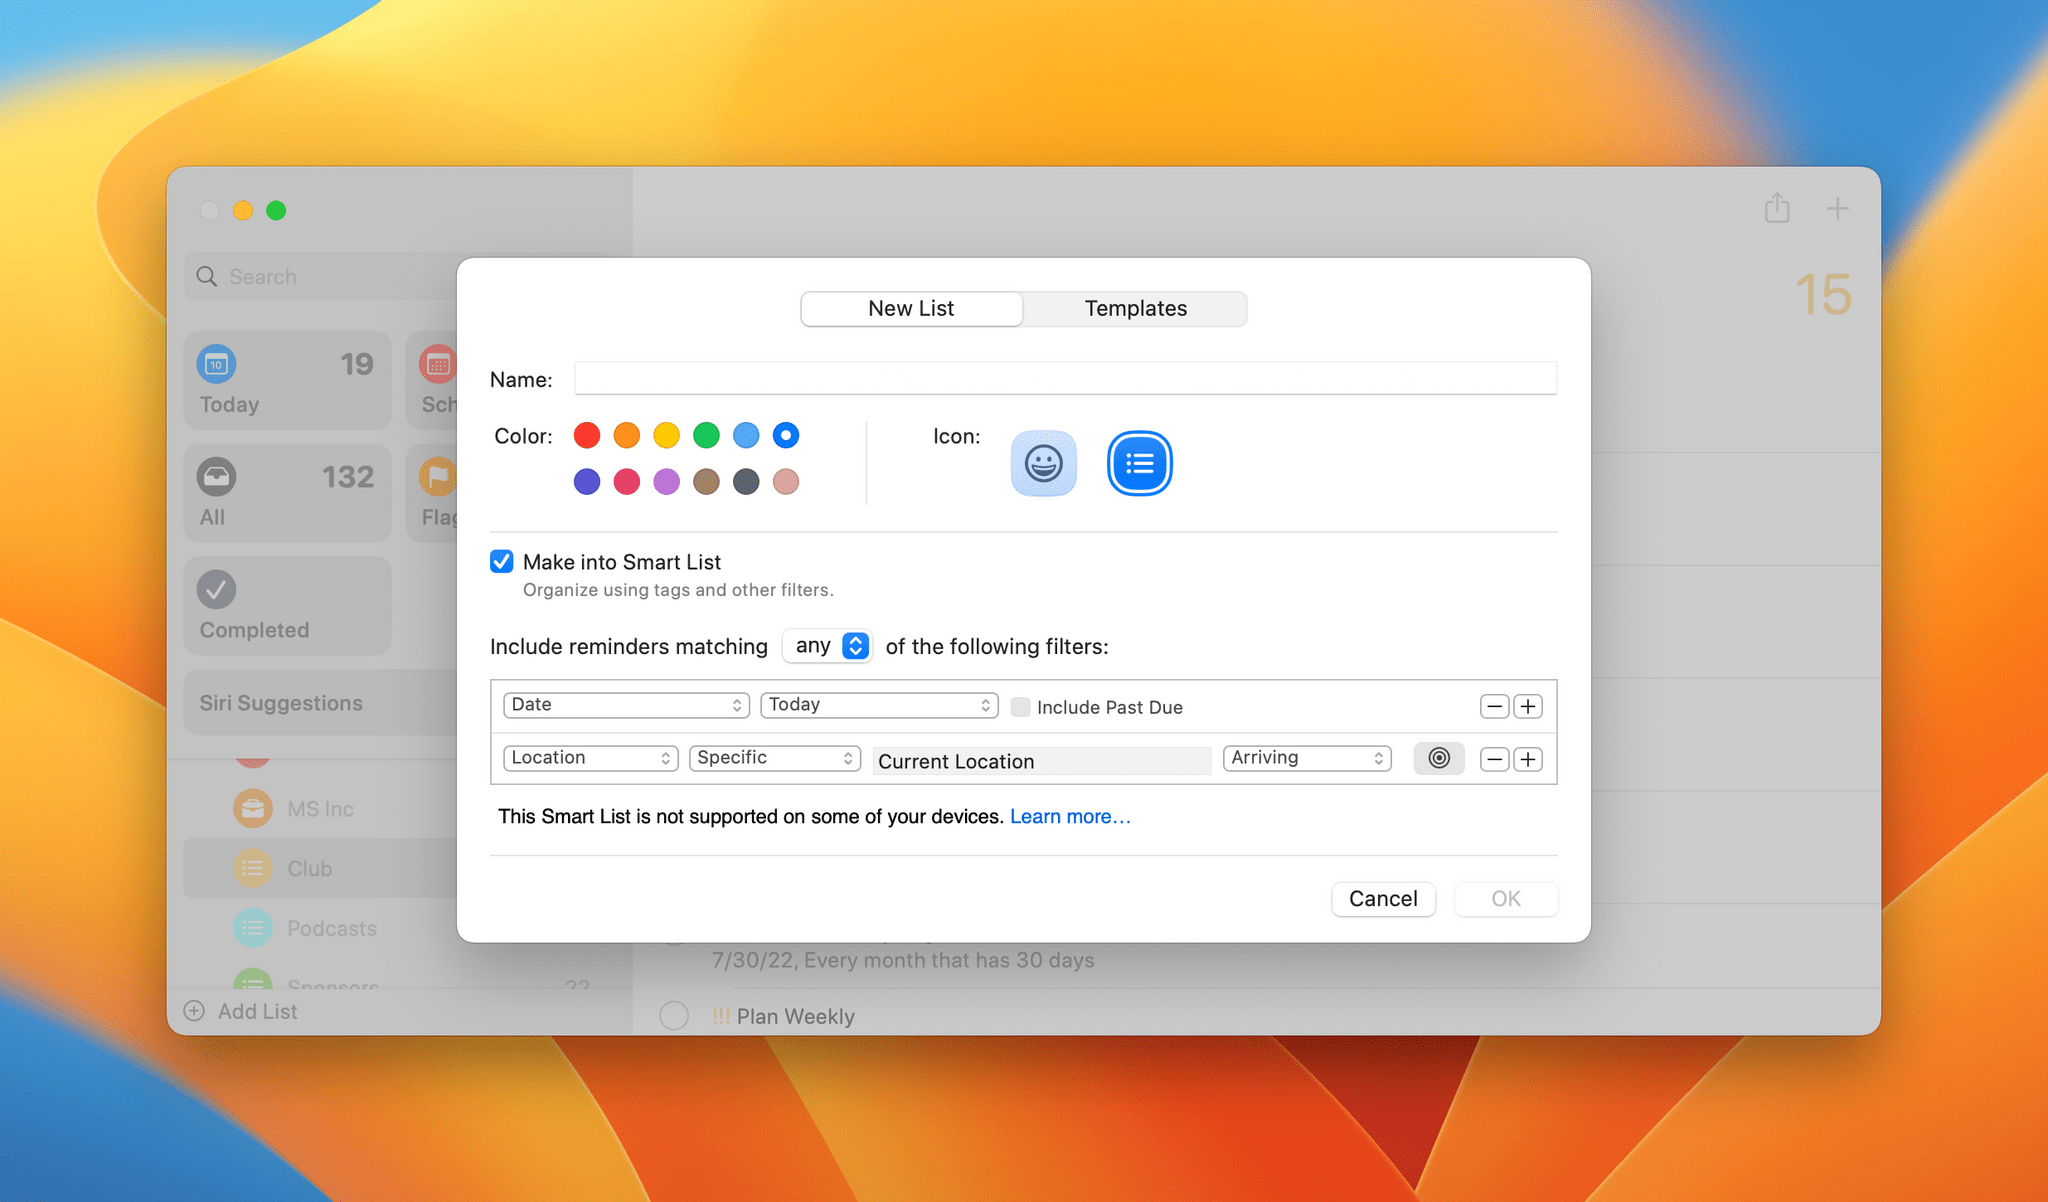 'Any' is now an option when setting up Smart List filters.